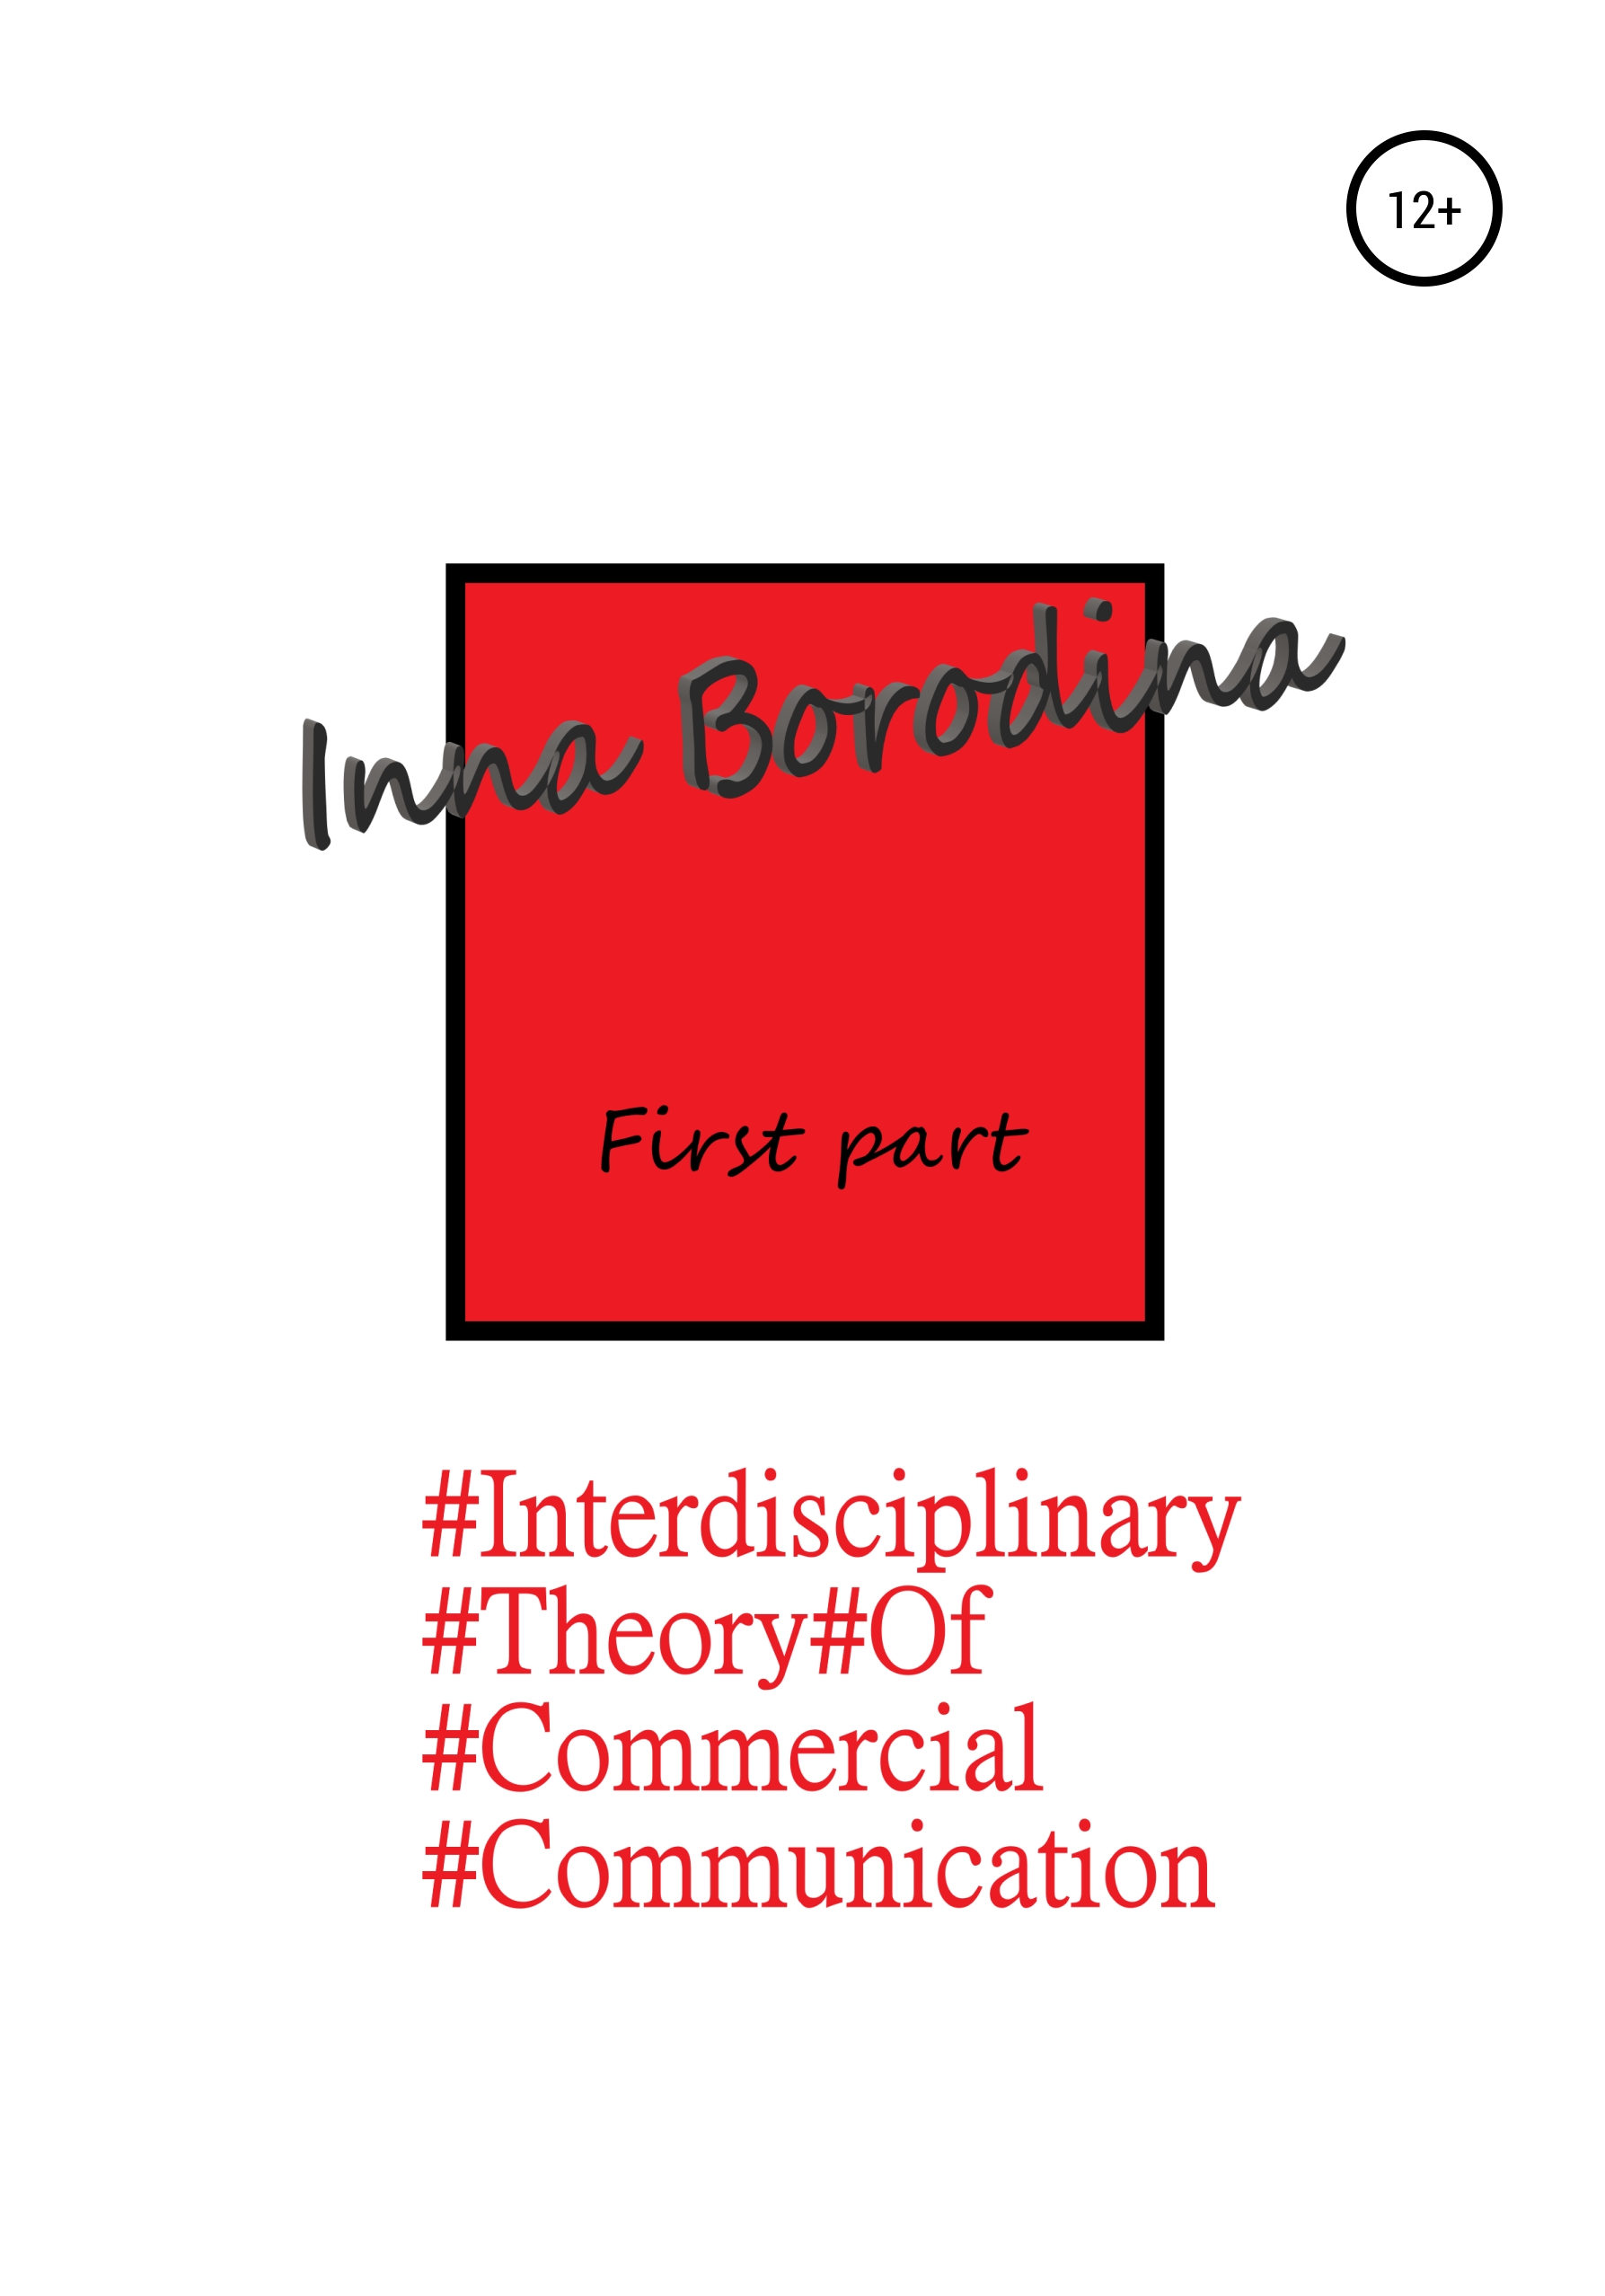 Interdisciplinary theory of commercial communication. First part